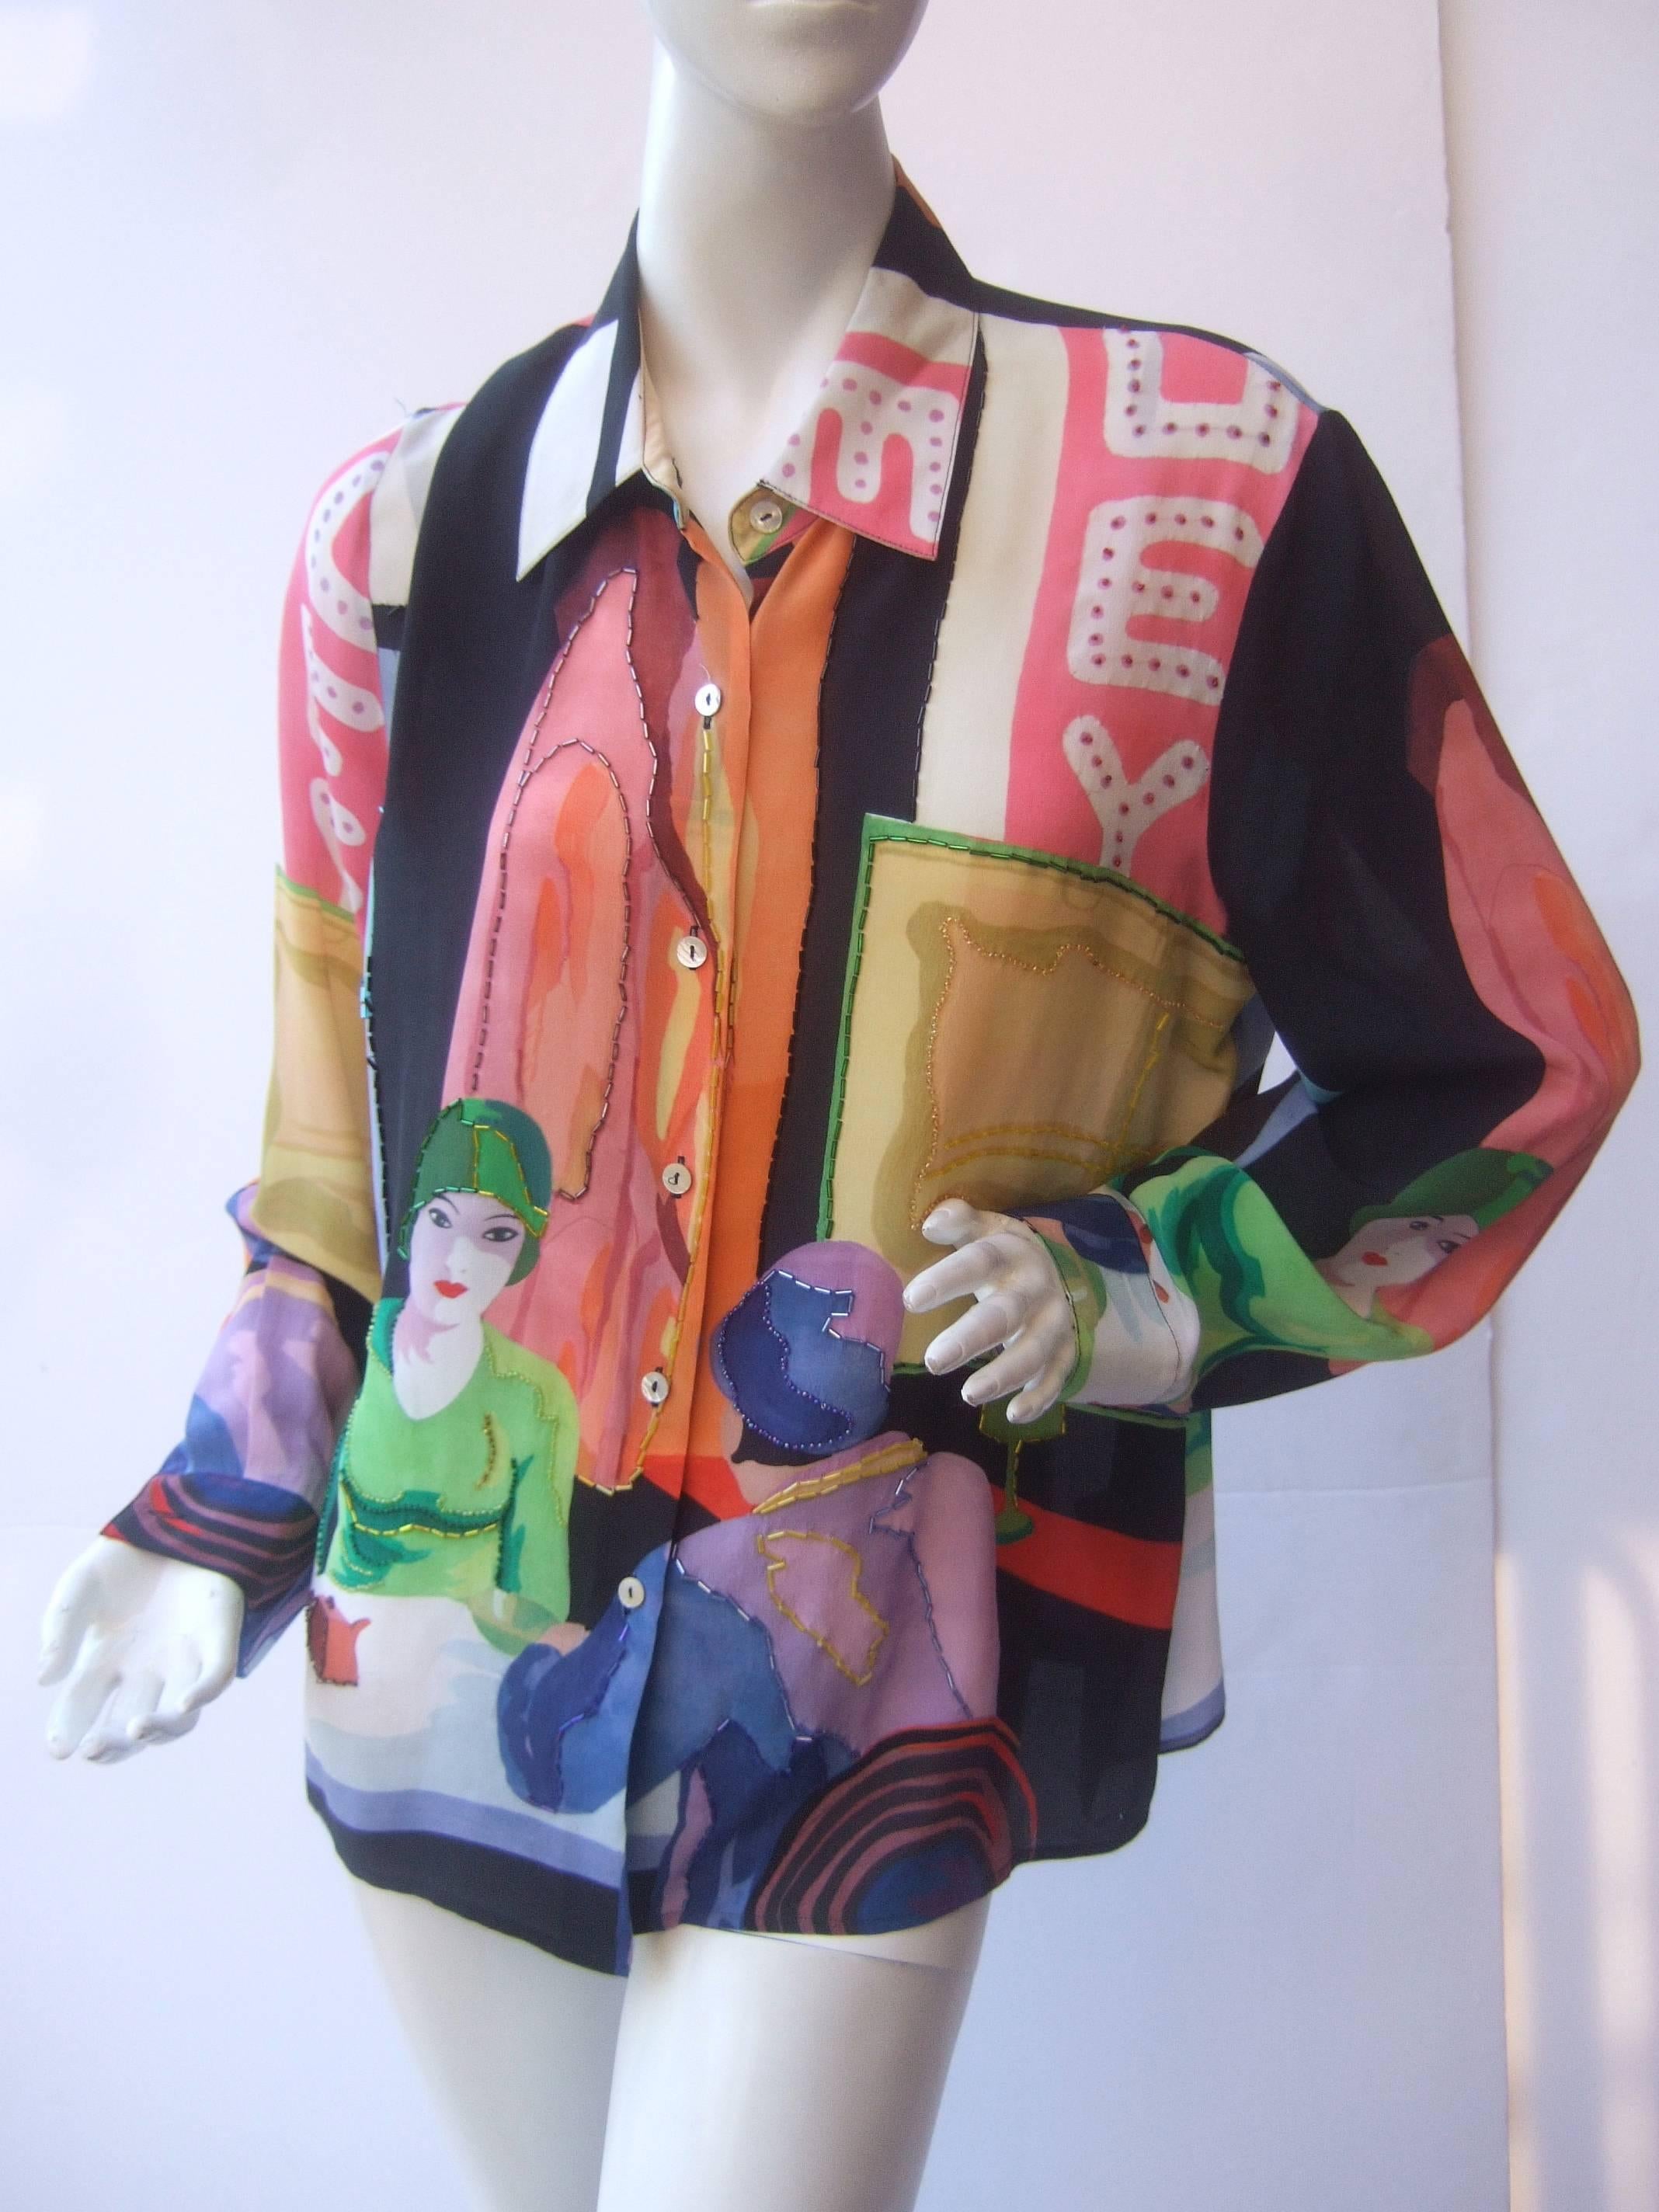 ***RESERVED SALE PENDING FOR DANIEL***
Silk beaded graphic print blouse c 1990s
The unique high fashion blouse is illustrated 
with a pair of elegant retro style women
having tea 

The bold graphics are a myriad of pastel
colors juxtaposed with